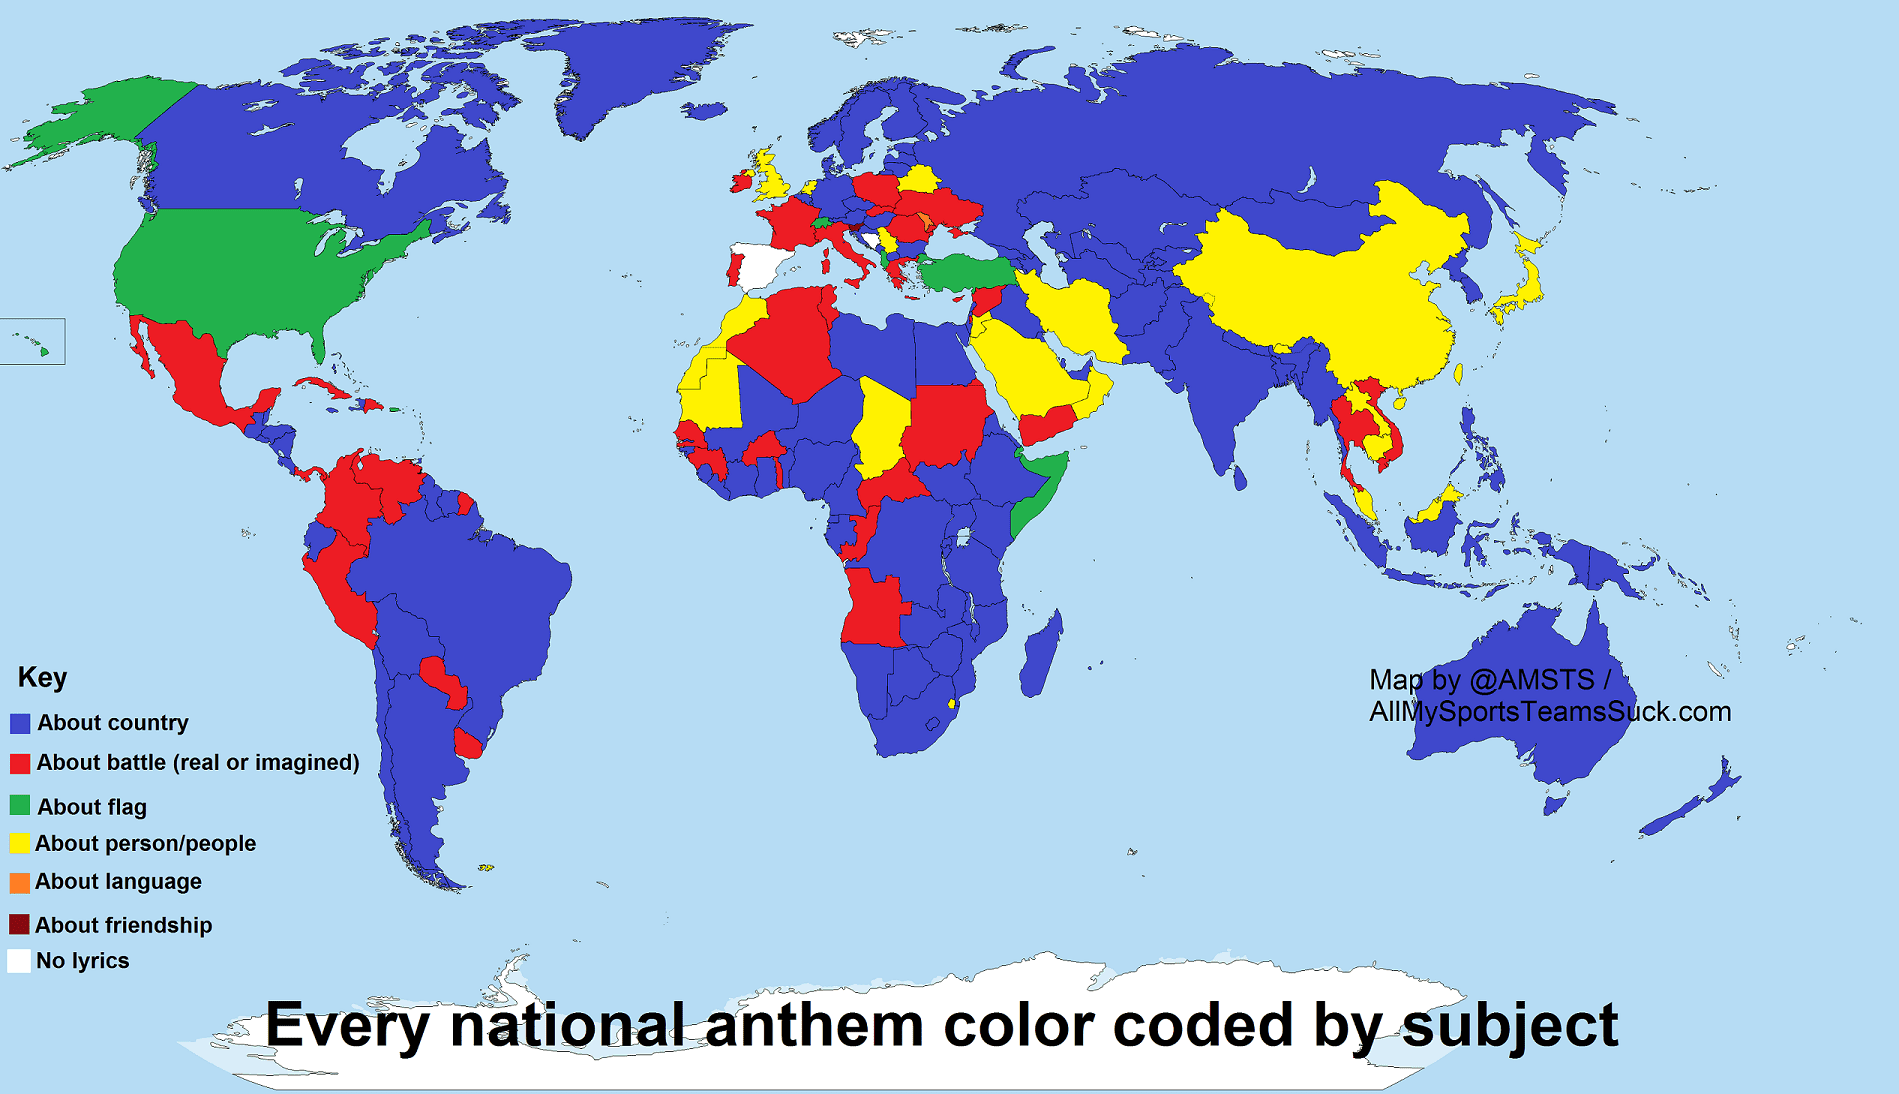 Not Sports: A Color Coded Map of Every National Anthem’s Subject